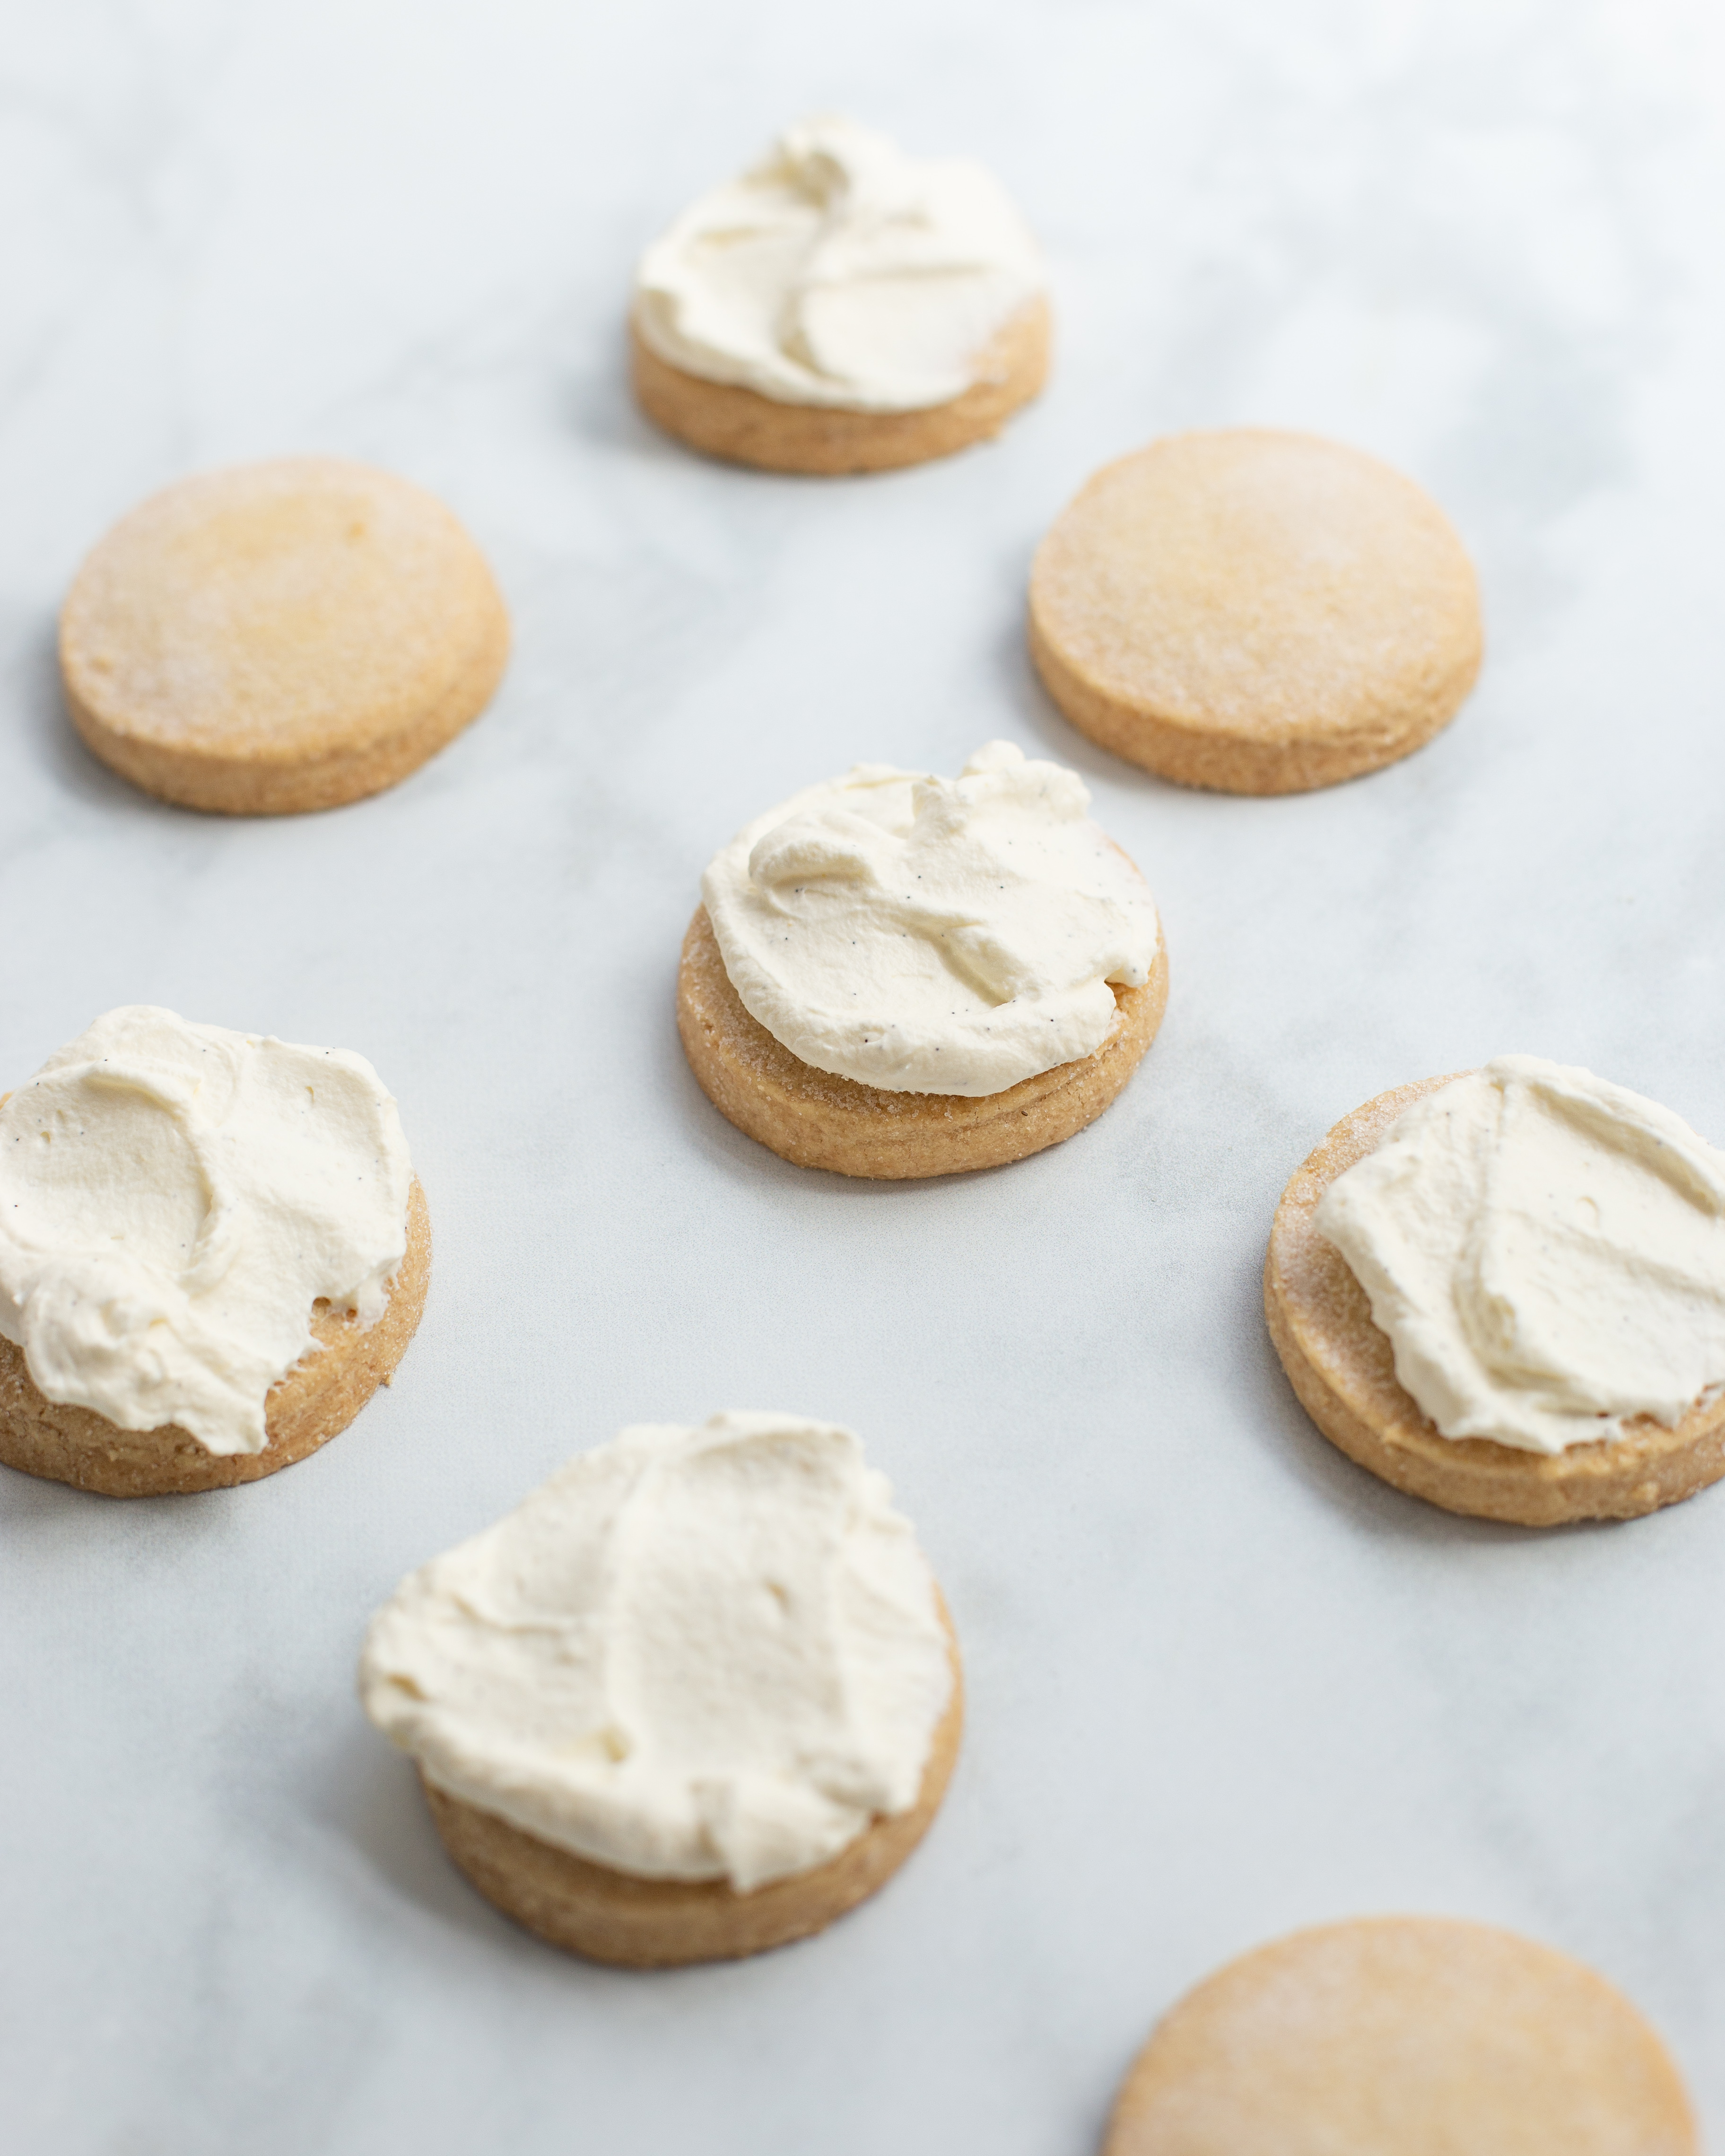 Top the shortbread rounds with a tablespoon of whipped cream.